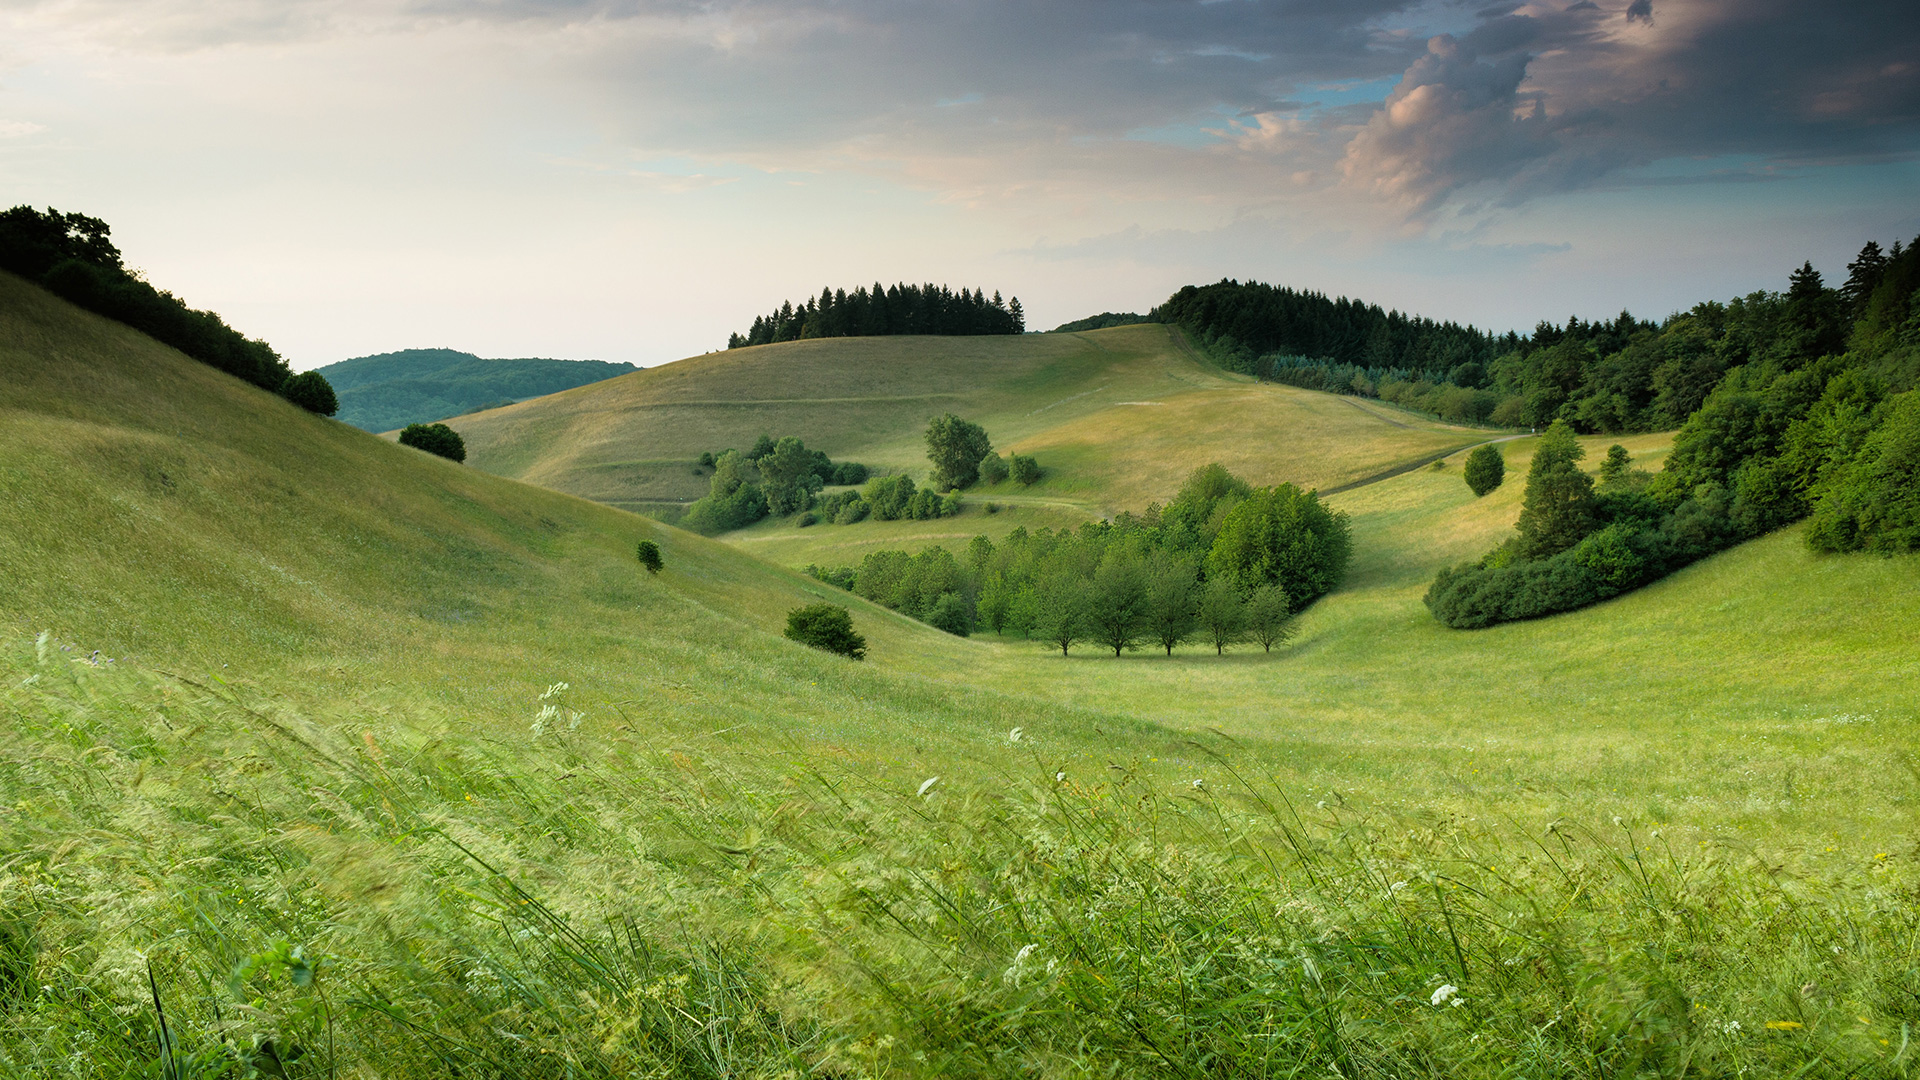 green-hills-with-forest-under-cloudy-sky-during-daytime